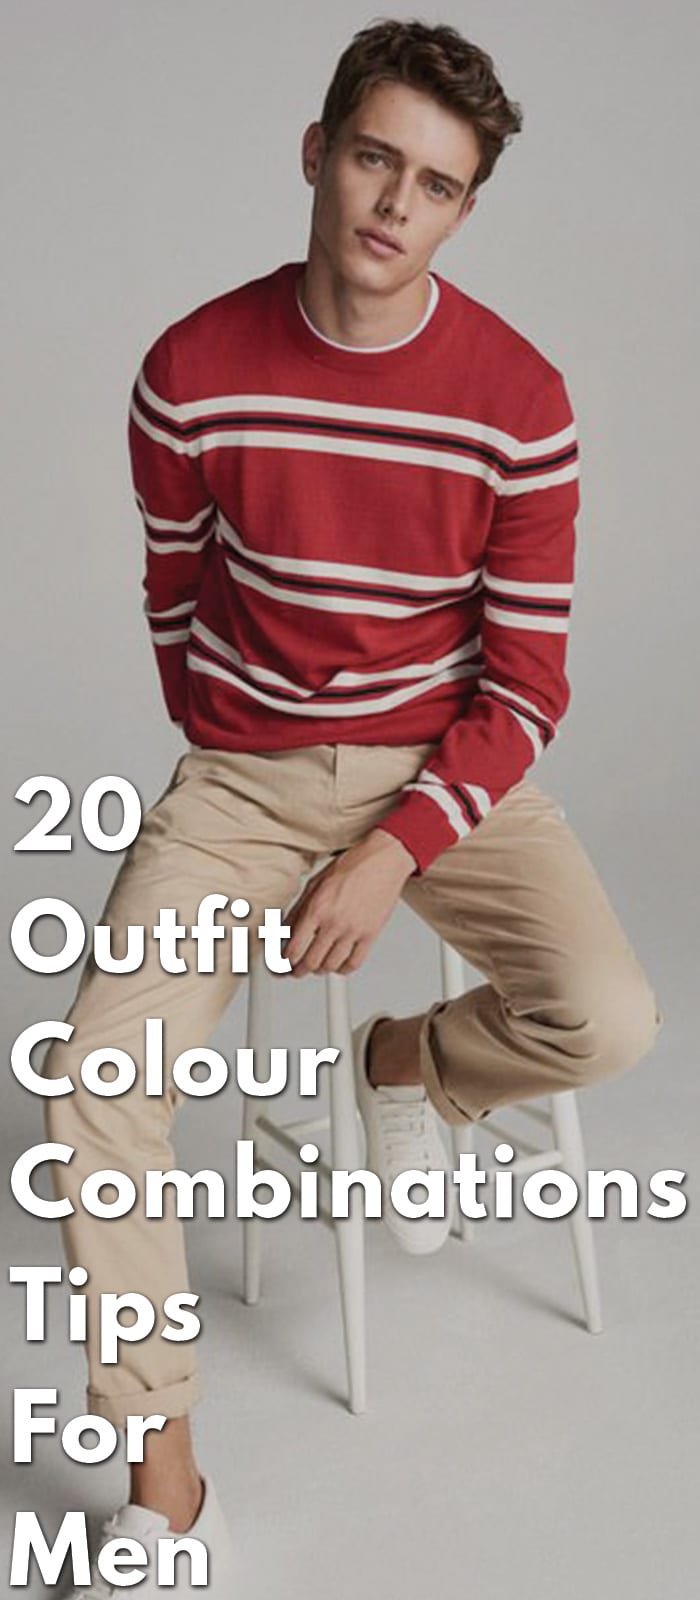 20-Outfit-Colour-Combinations-Tips-For-Men.